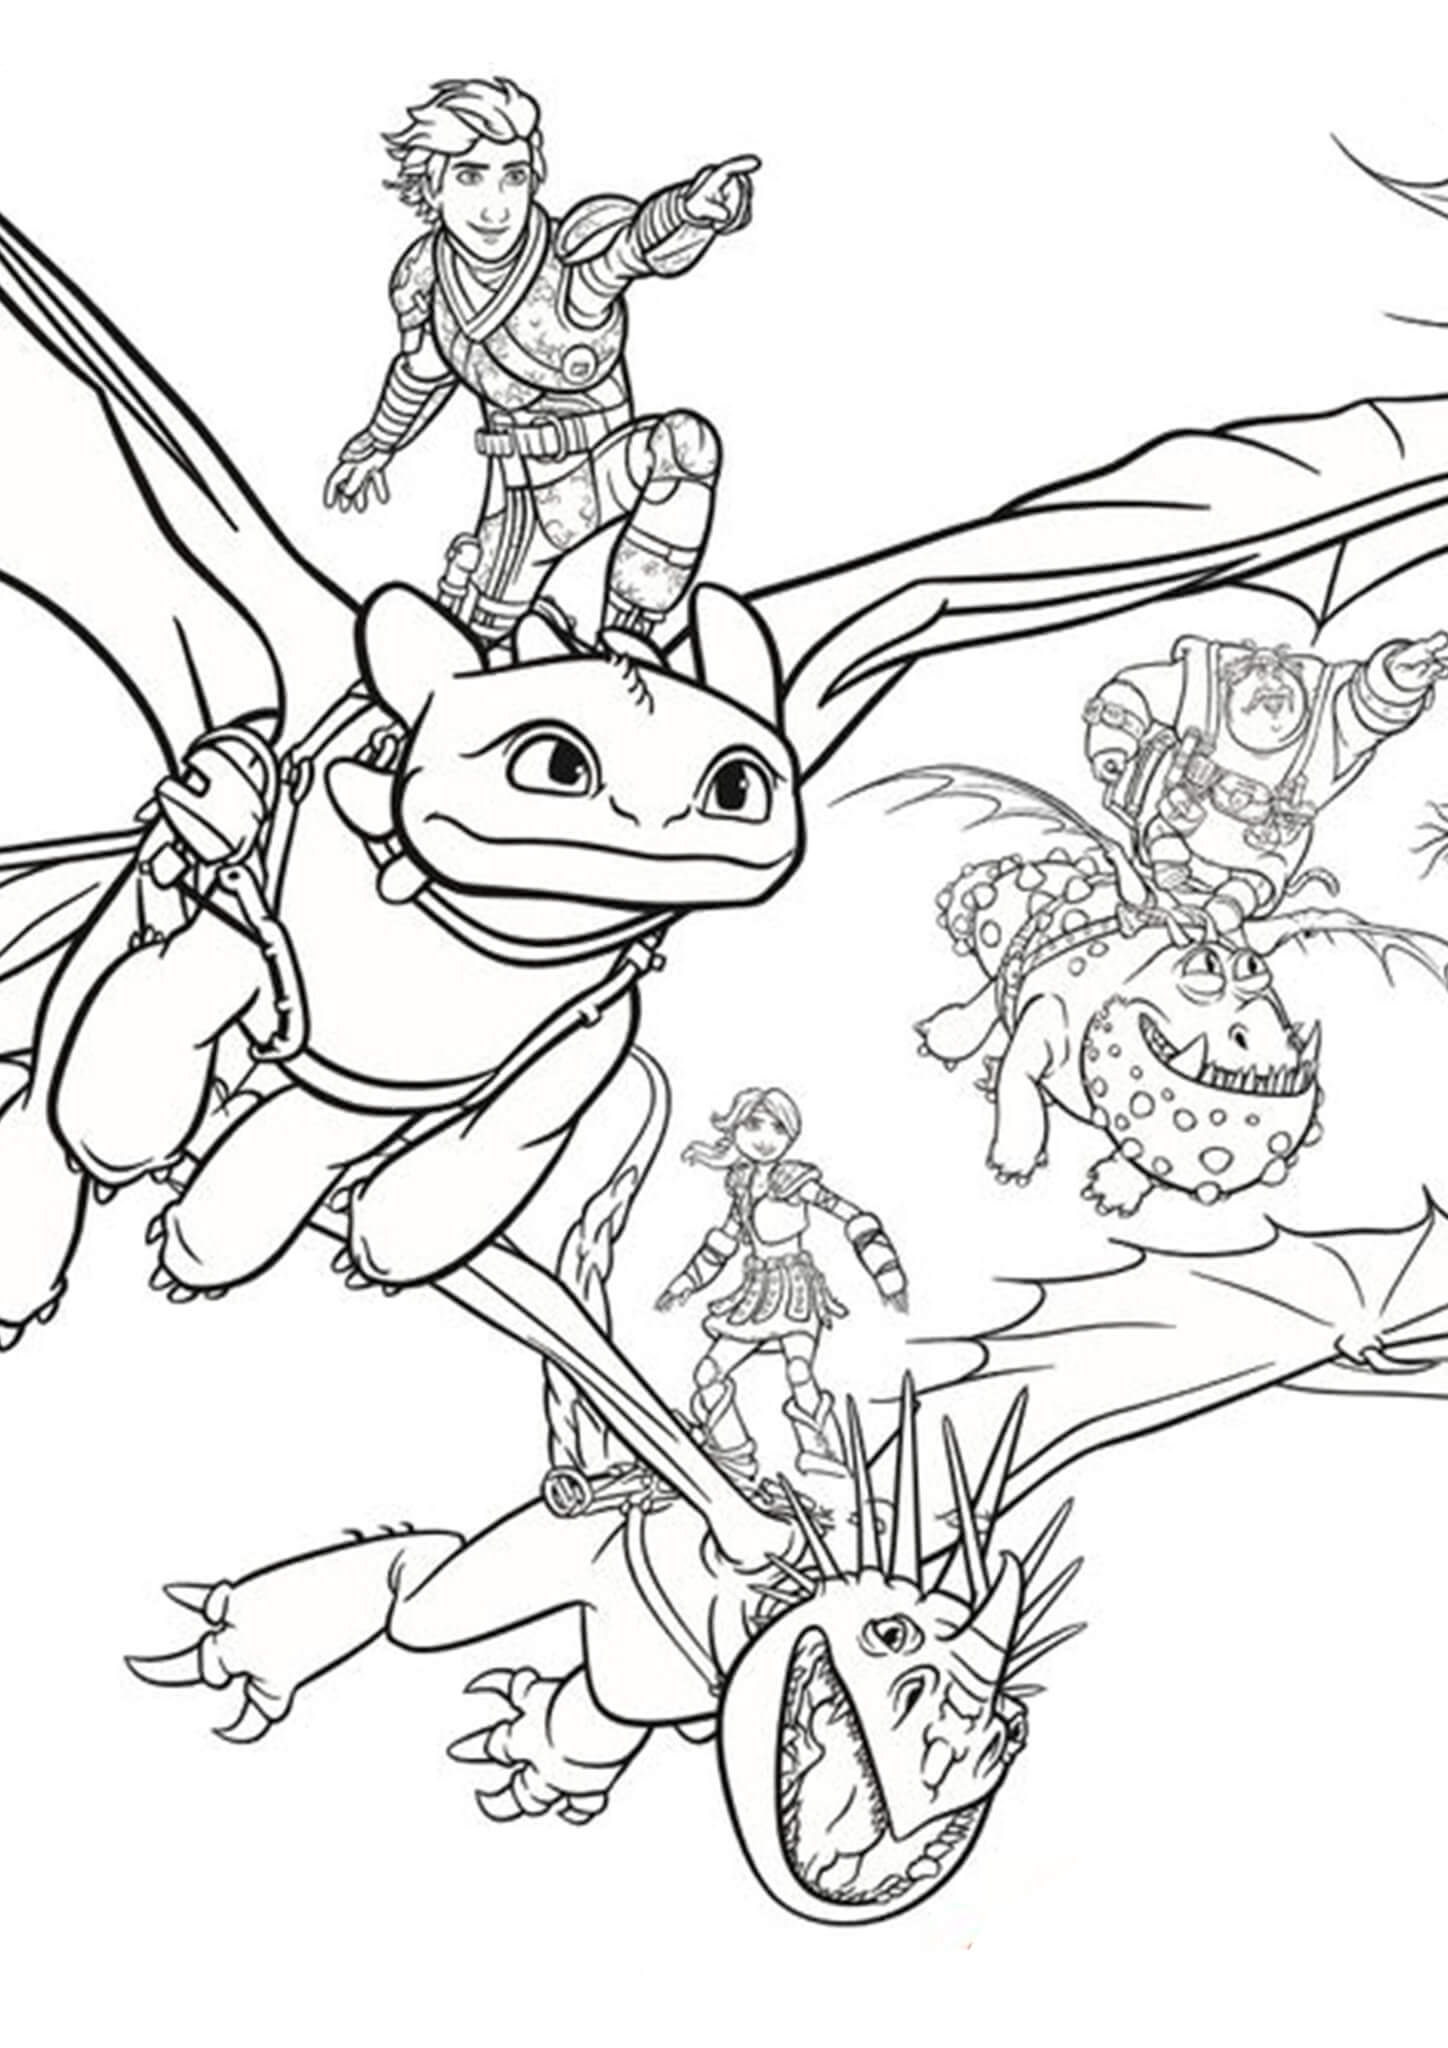 How To Train Your Dragon Colouring Pages To Print